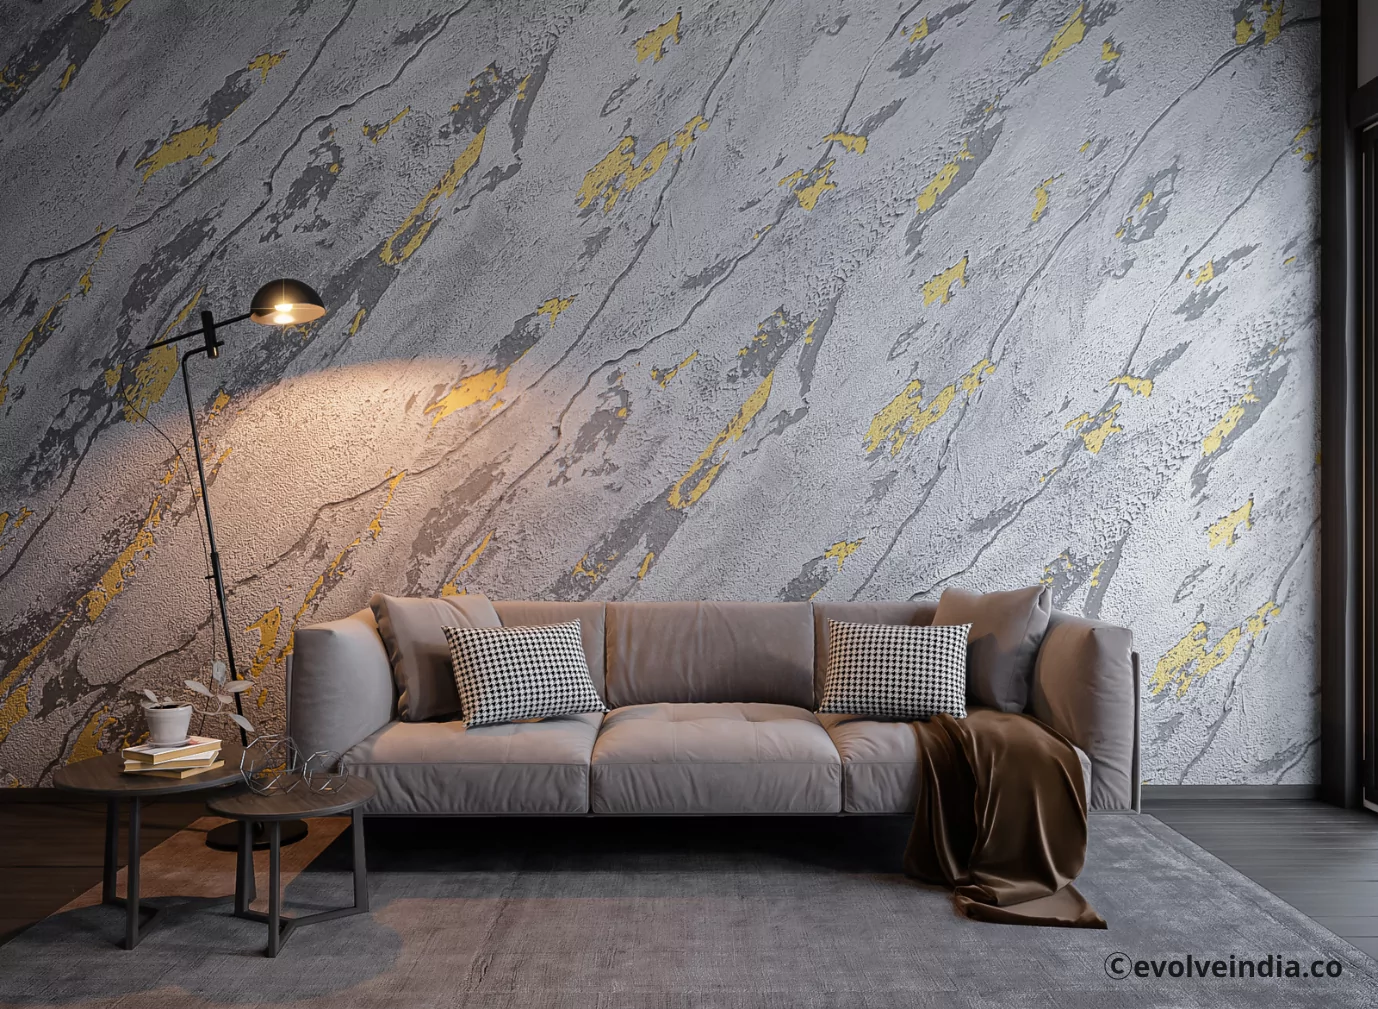 Obsidia Grey Artistique Fusion Living Room Wall By Evolve India